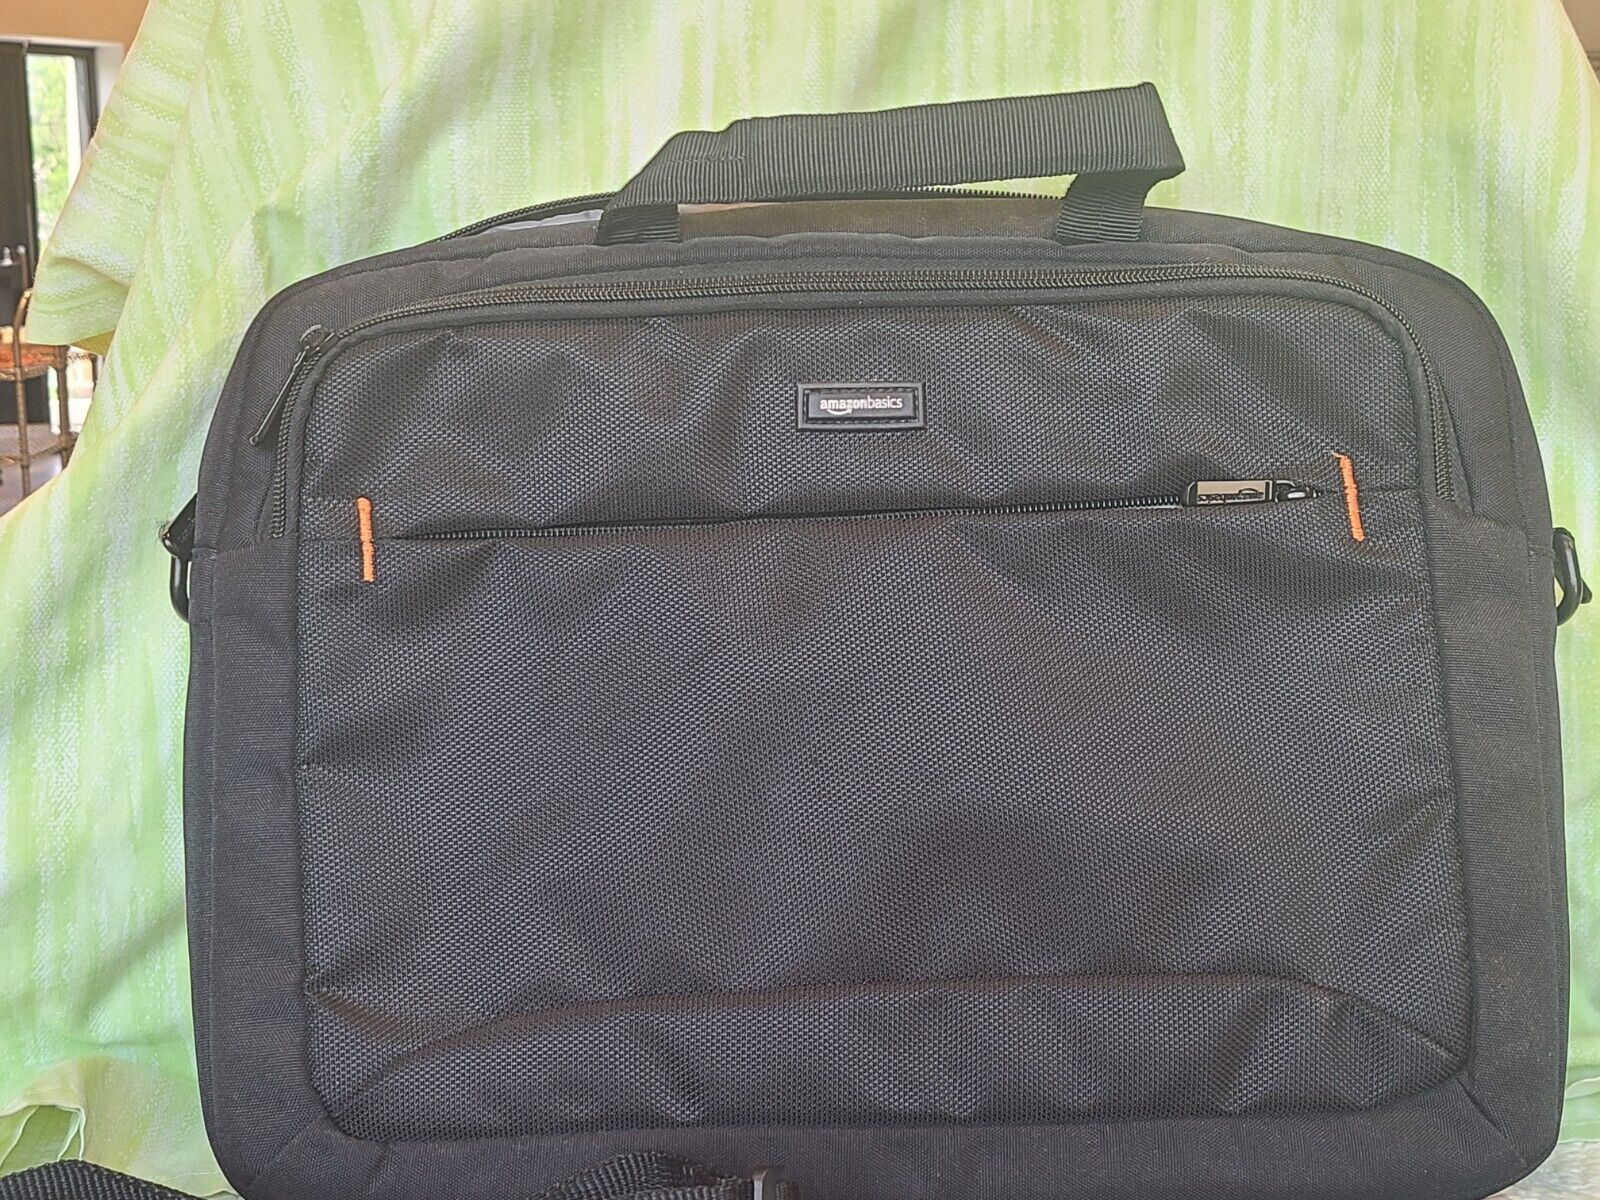 AmazonBasics 17 inch Laptop Bag - Black New Strap Work Office Tablet Briefcase